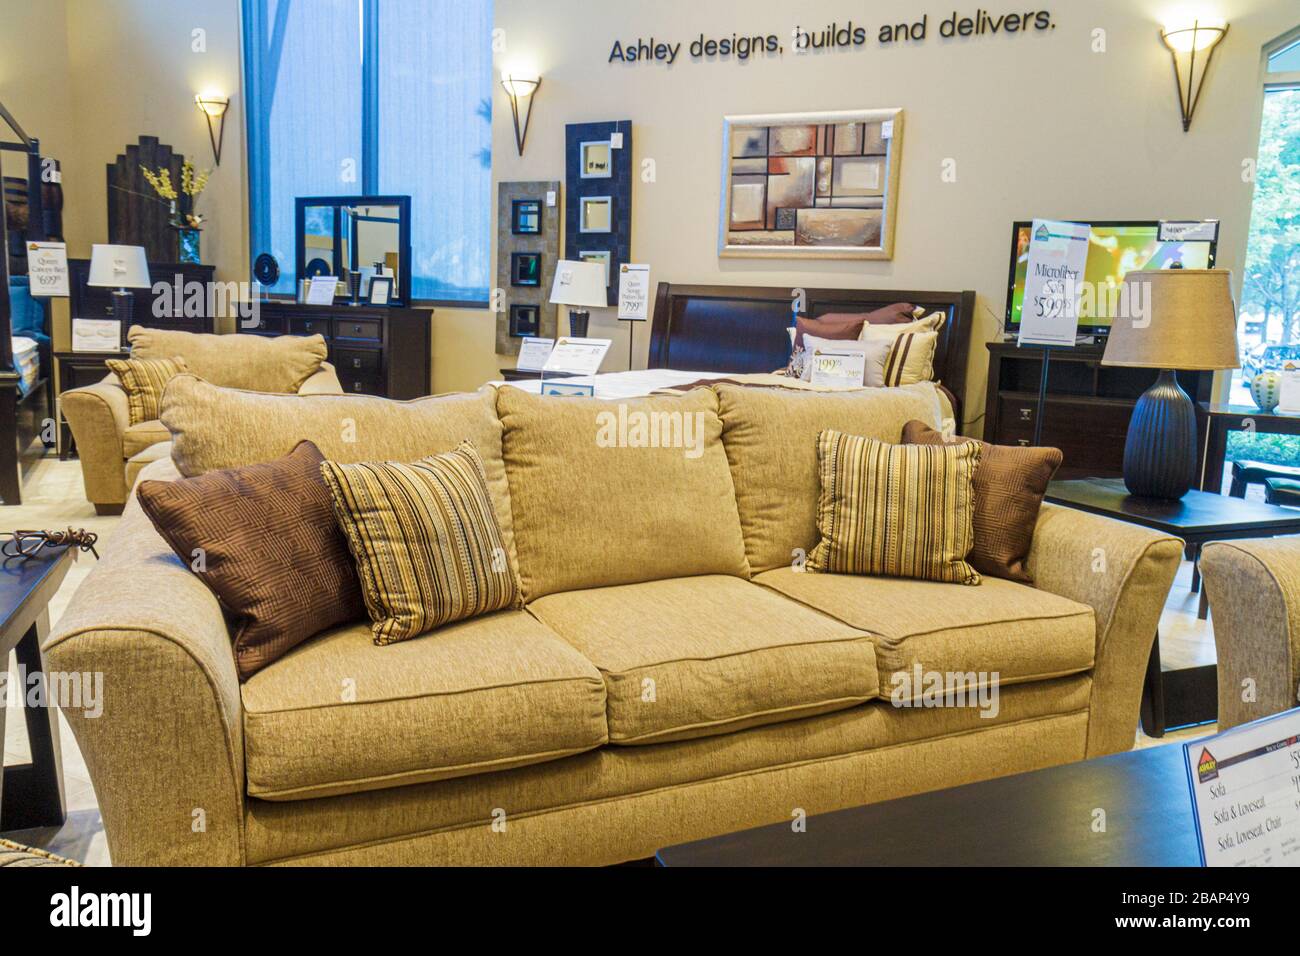 Ashley Furniture High Resolution Stock Photography And Images Alamy